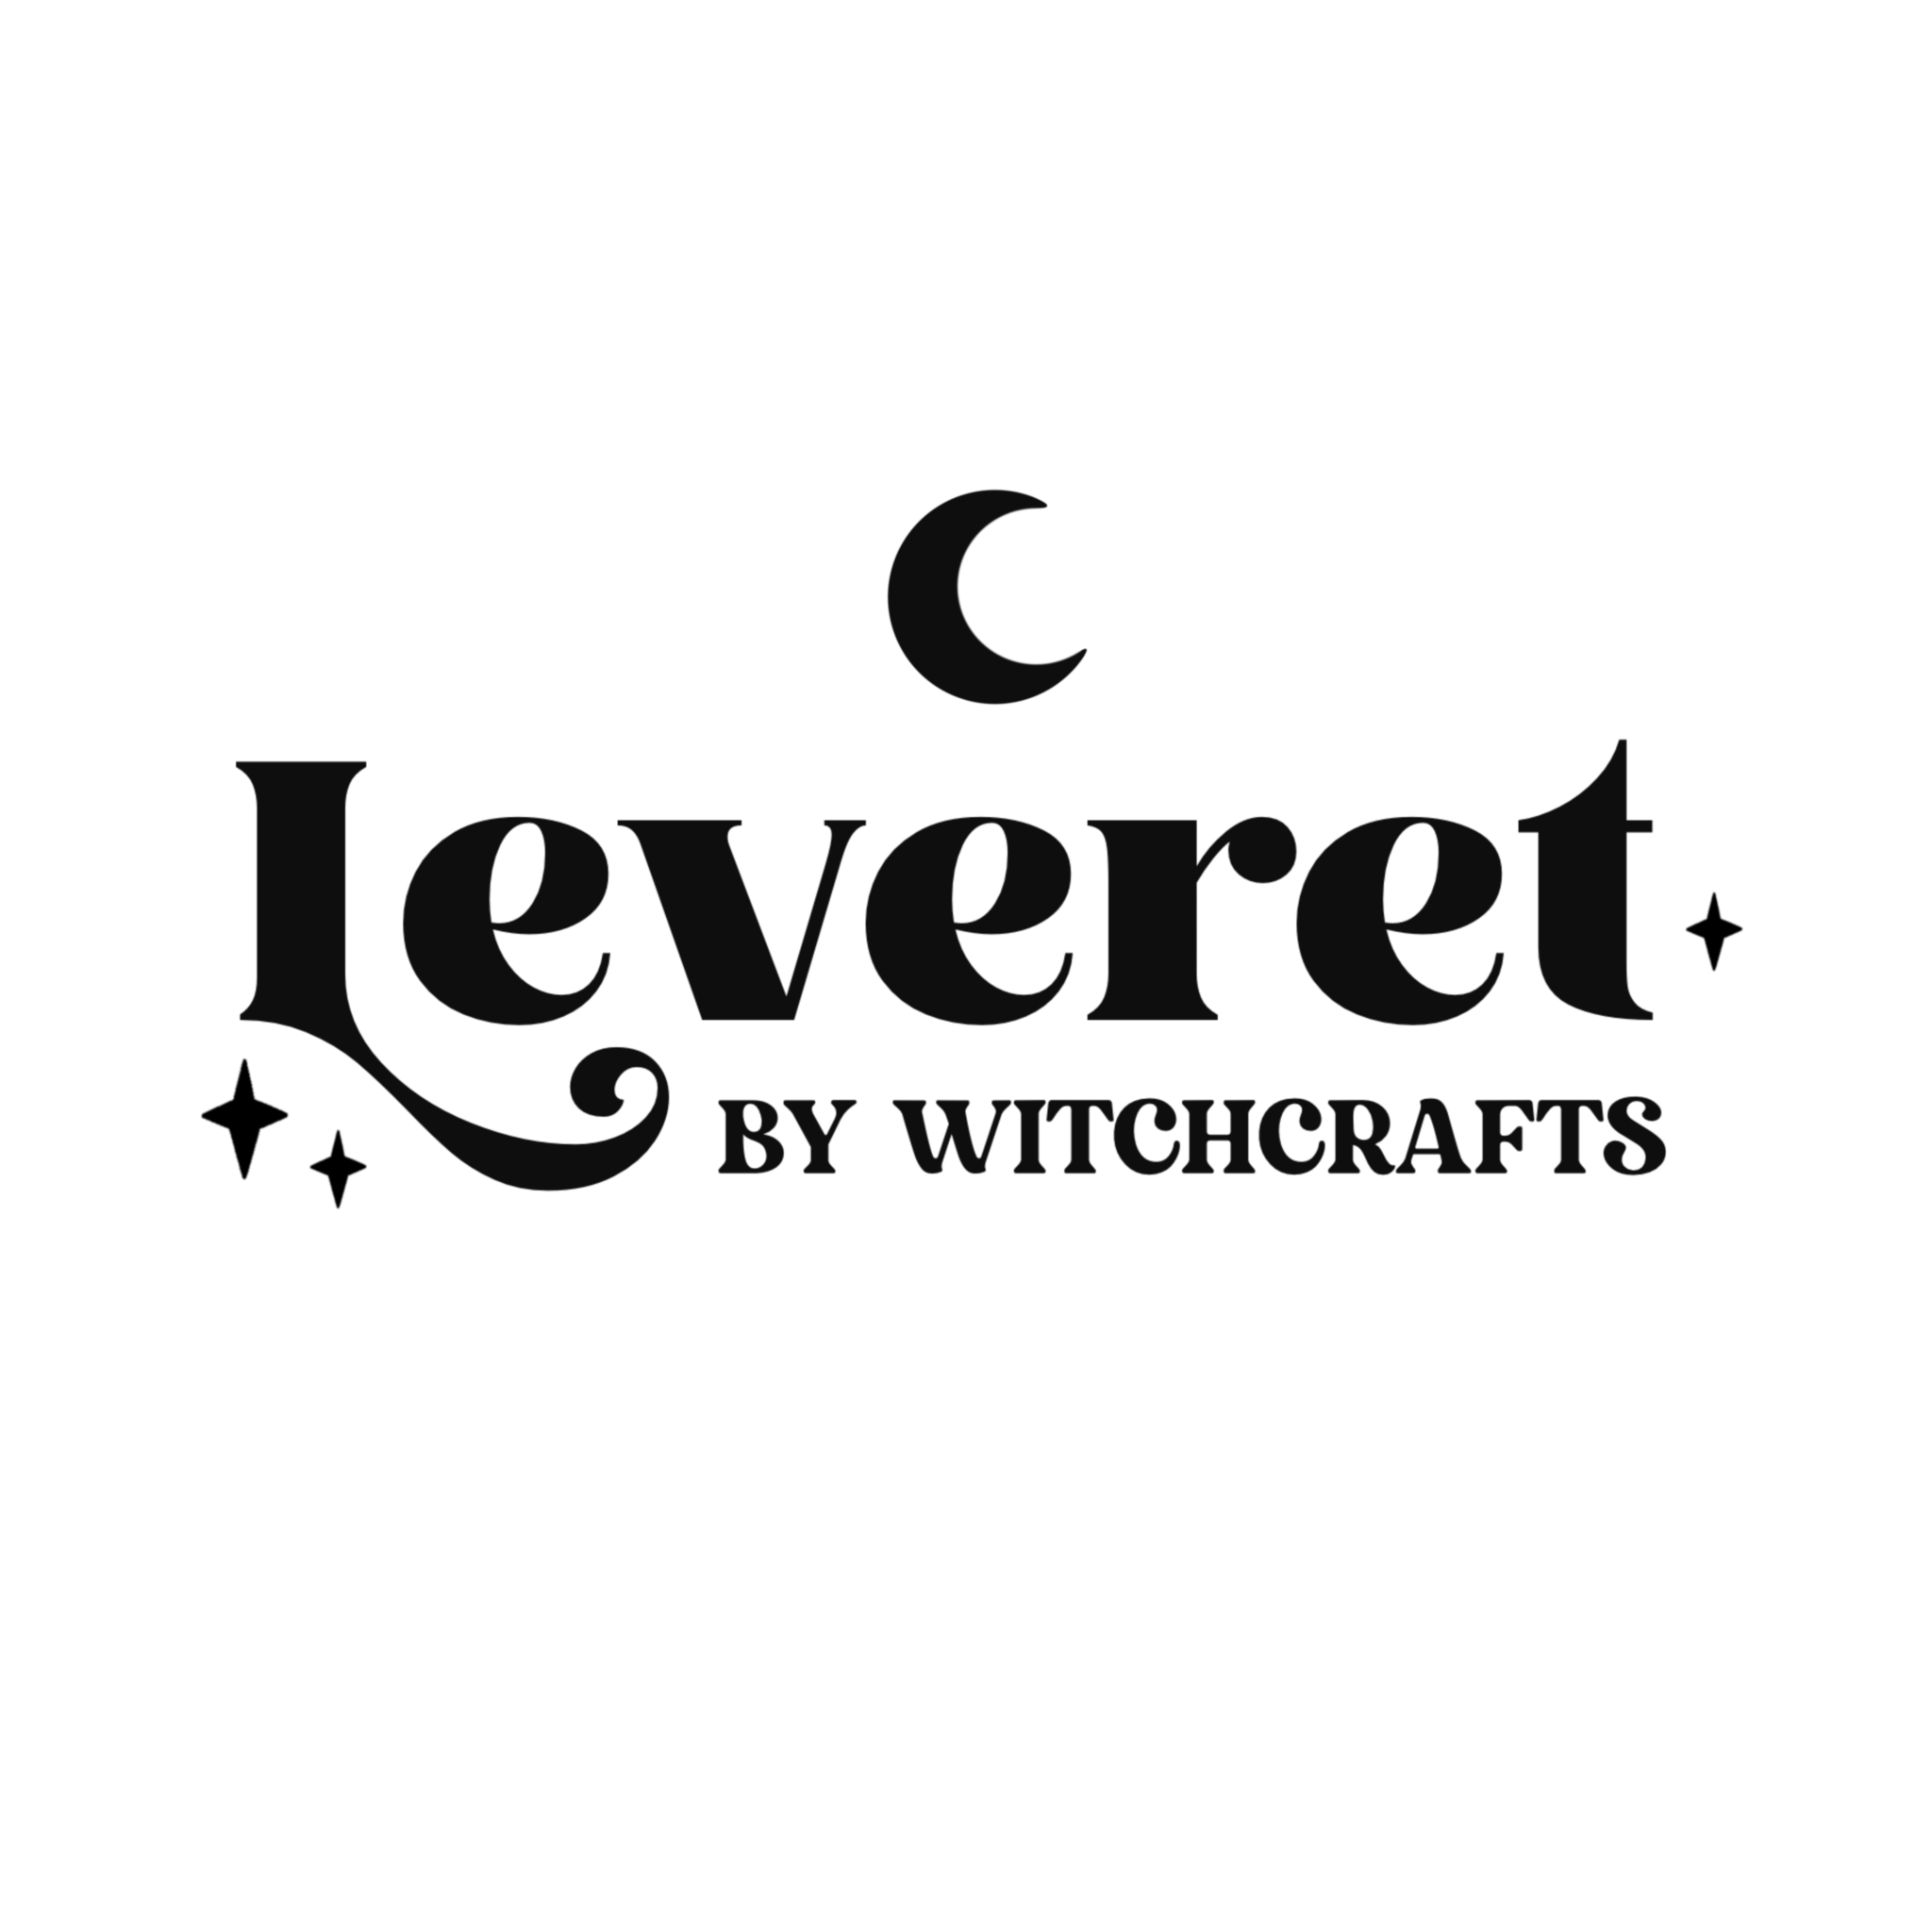 LEVERET By Witch Crafts